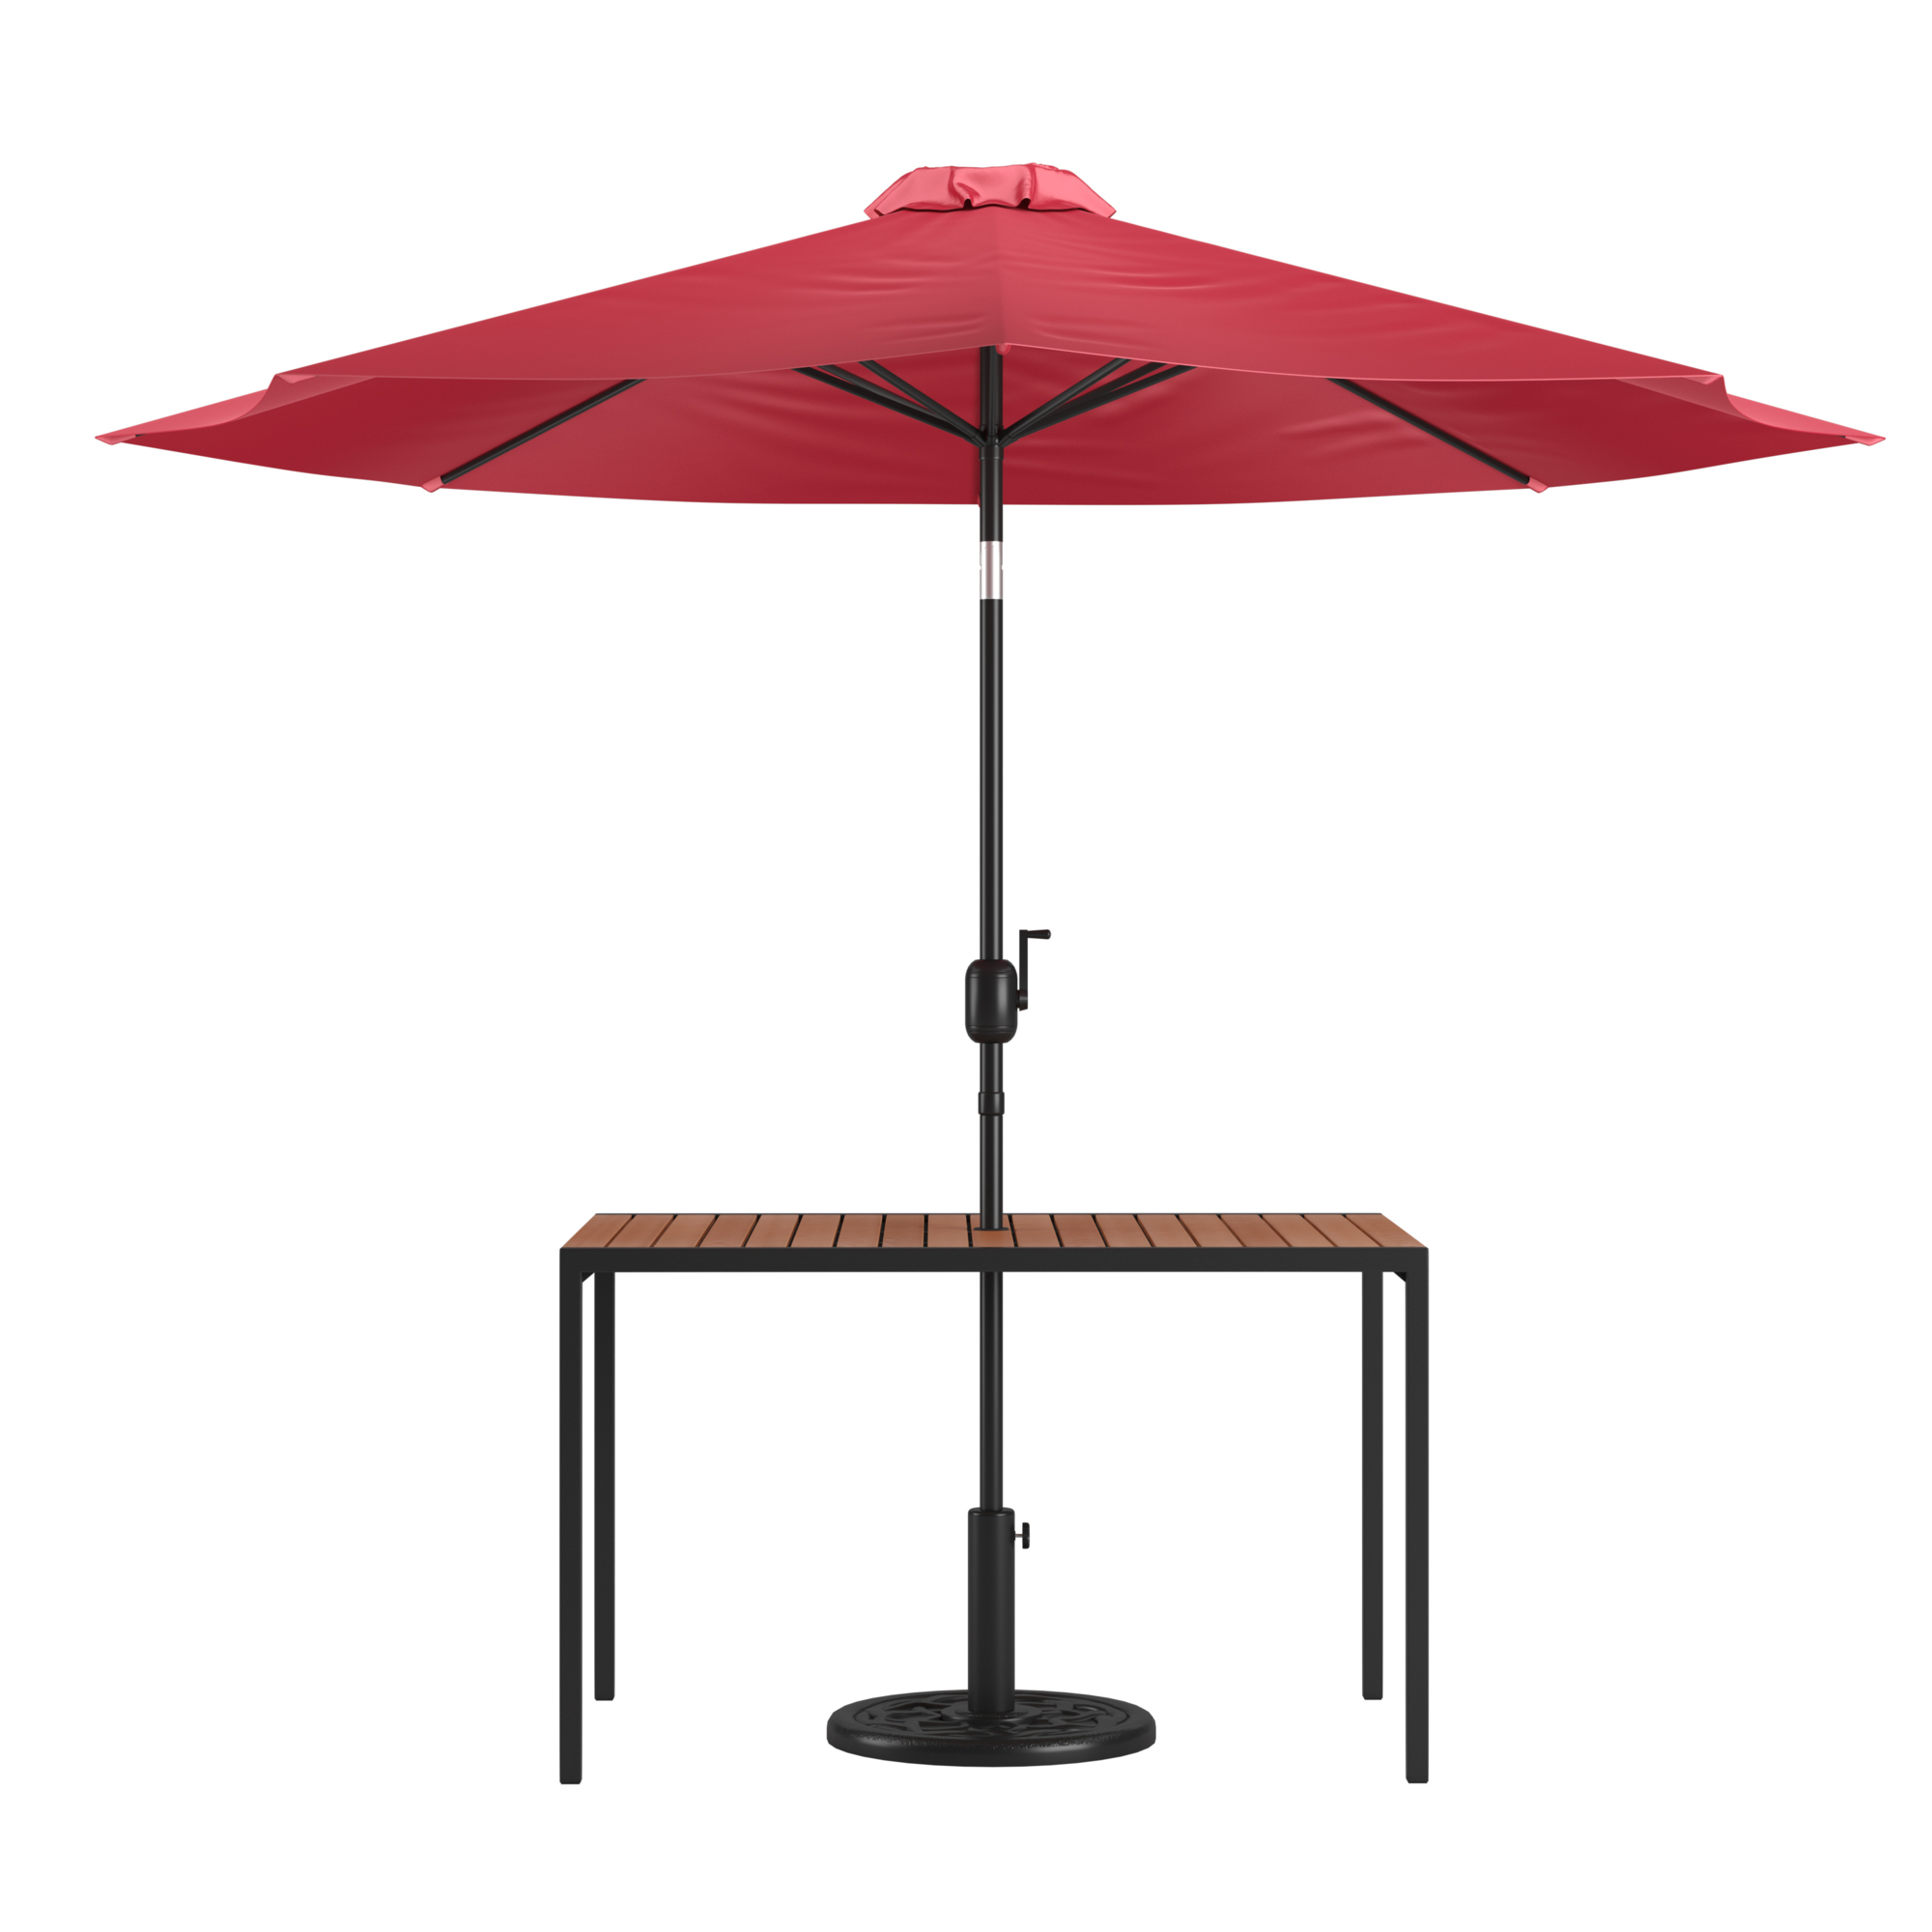 Flash Furniture, Faux Teak 30 x 48 Patio Table-Red Umbrella Base, Table Shape Rectangle, Primary Color Red, Height 29.5 in, Model XU3048UB19BRD